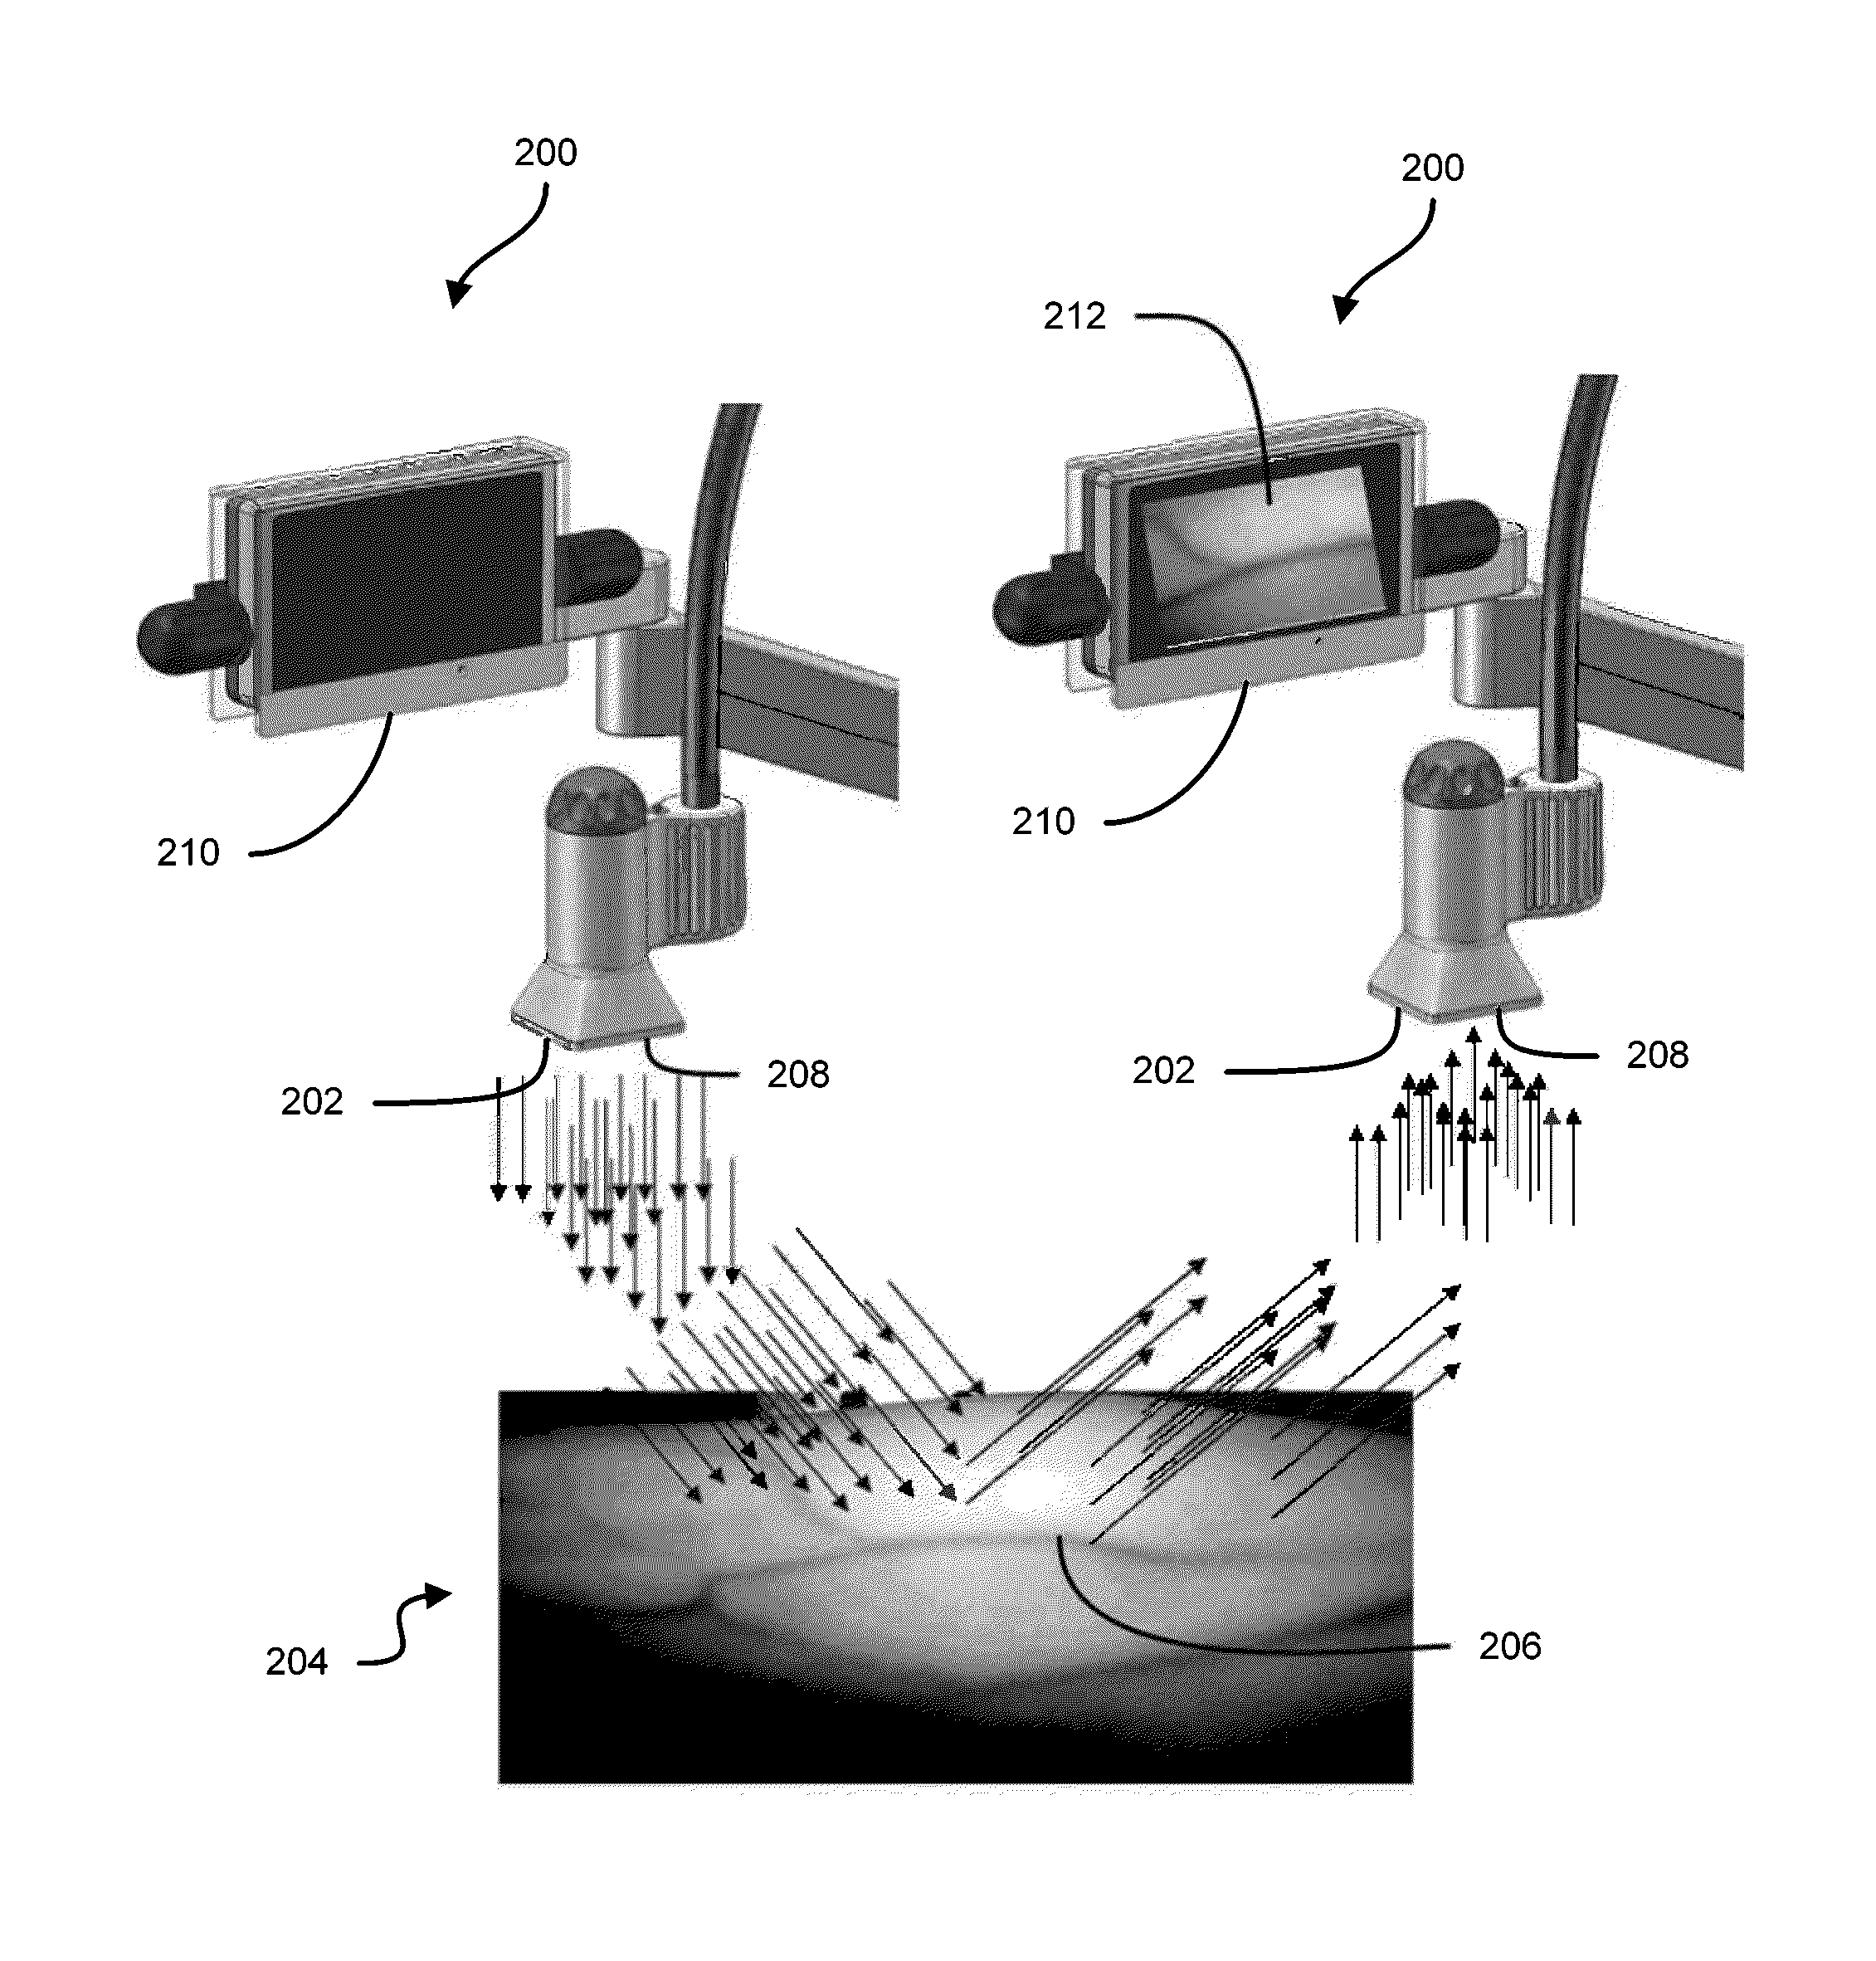 Vein imaging systems and methods